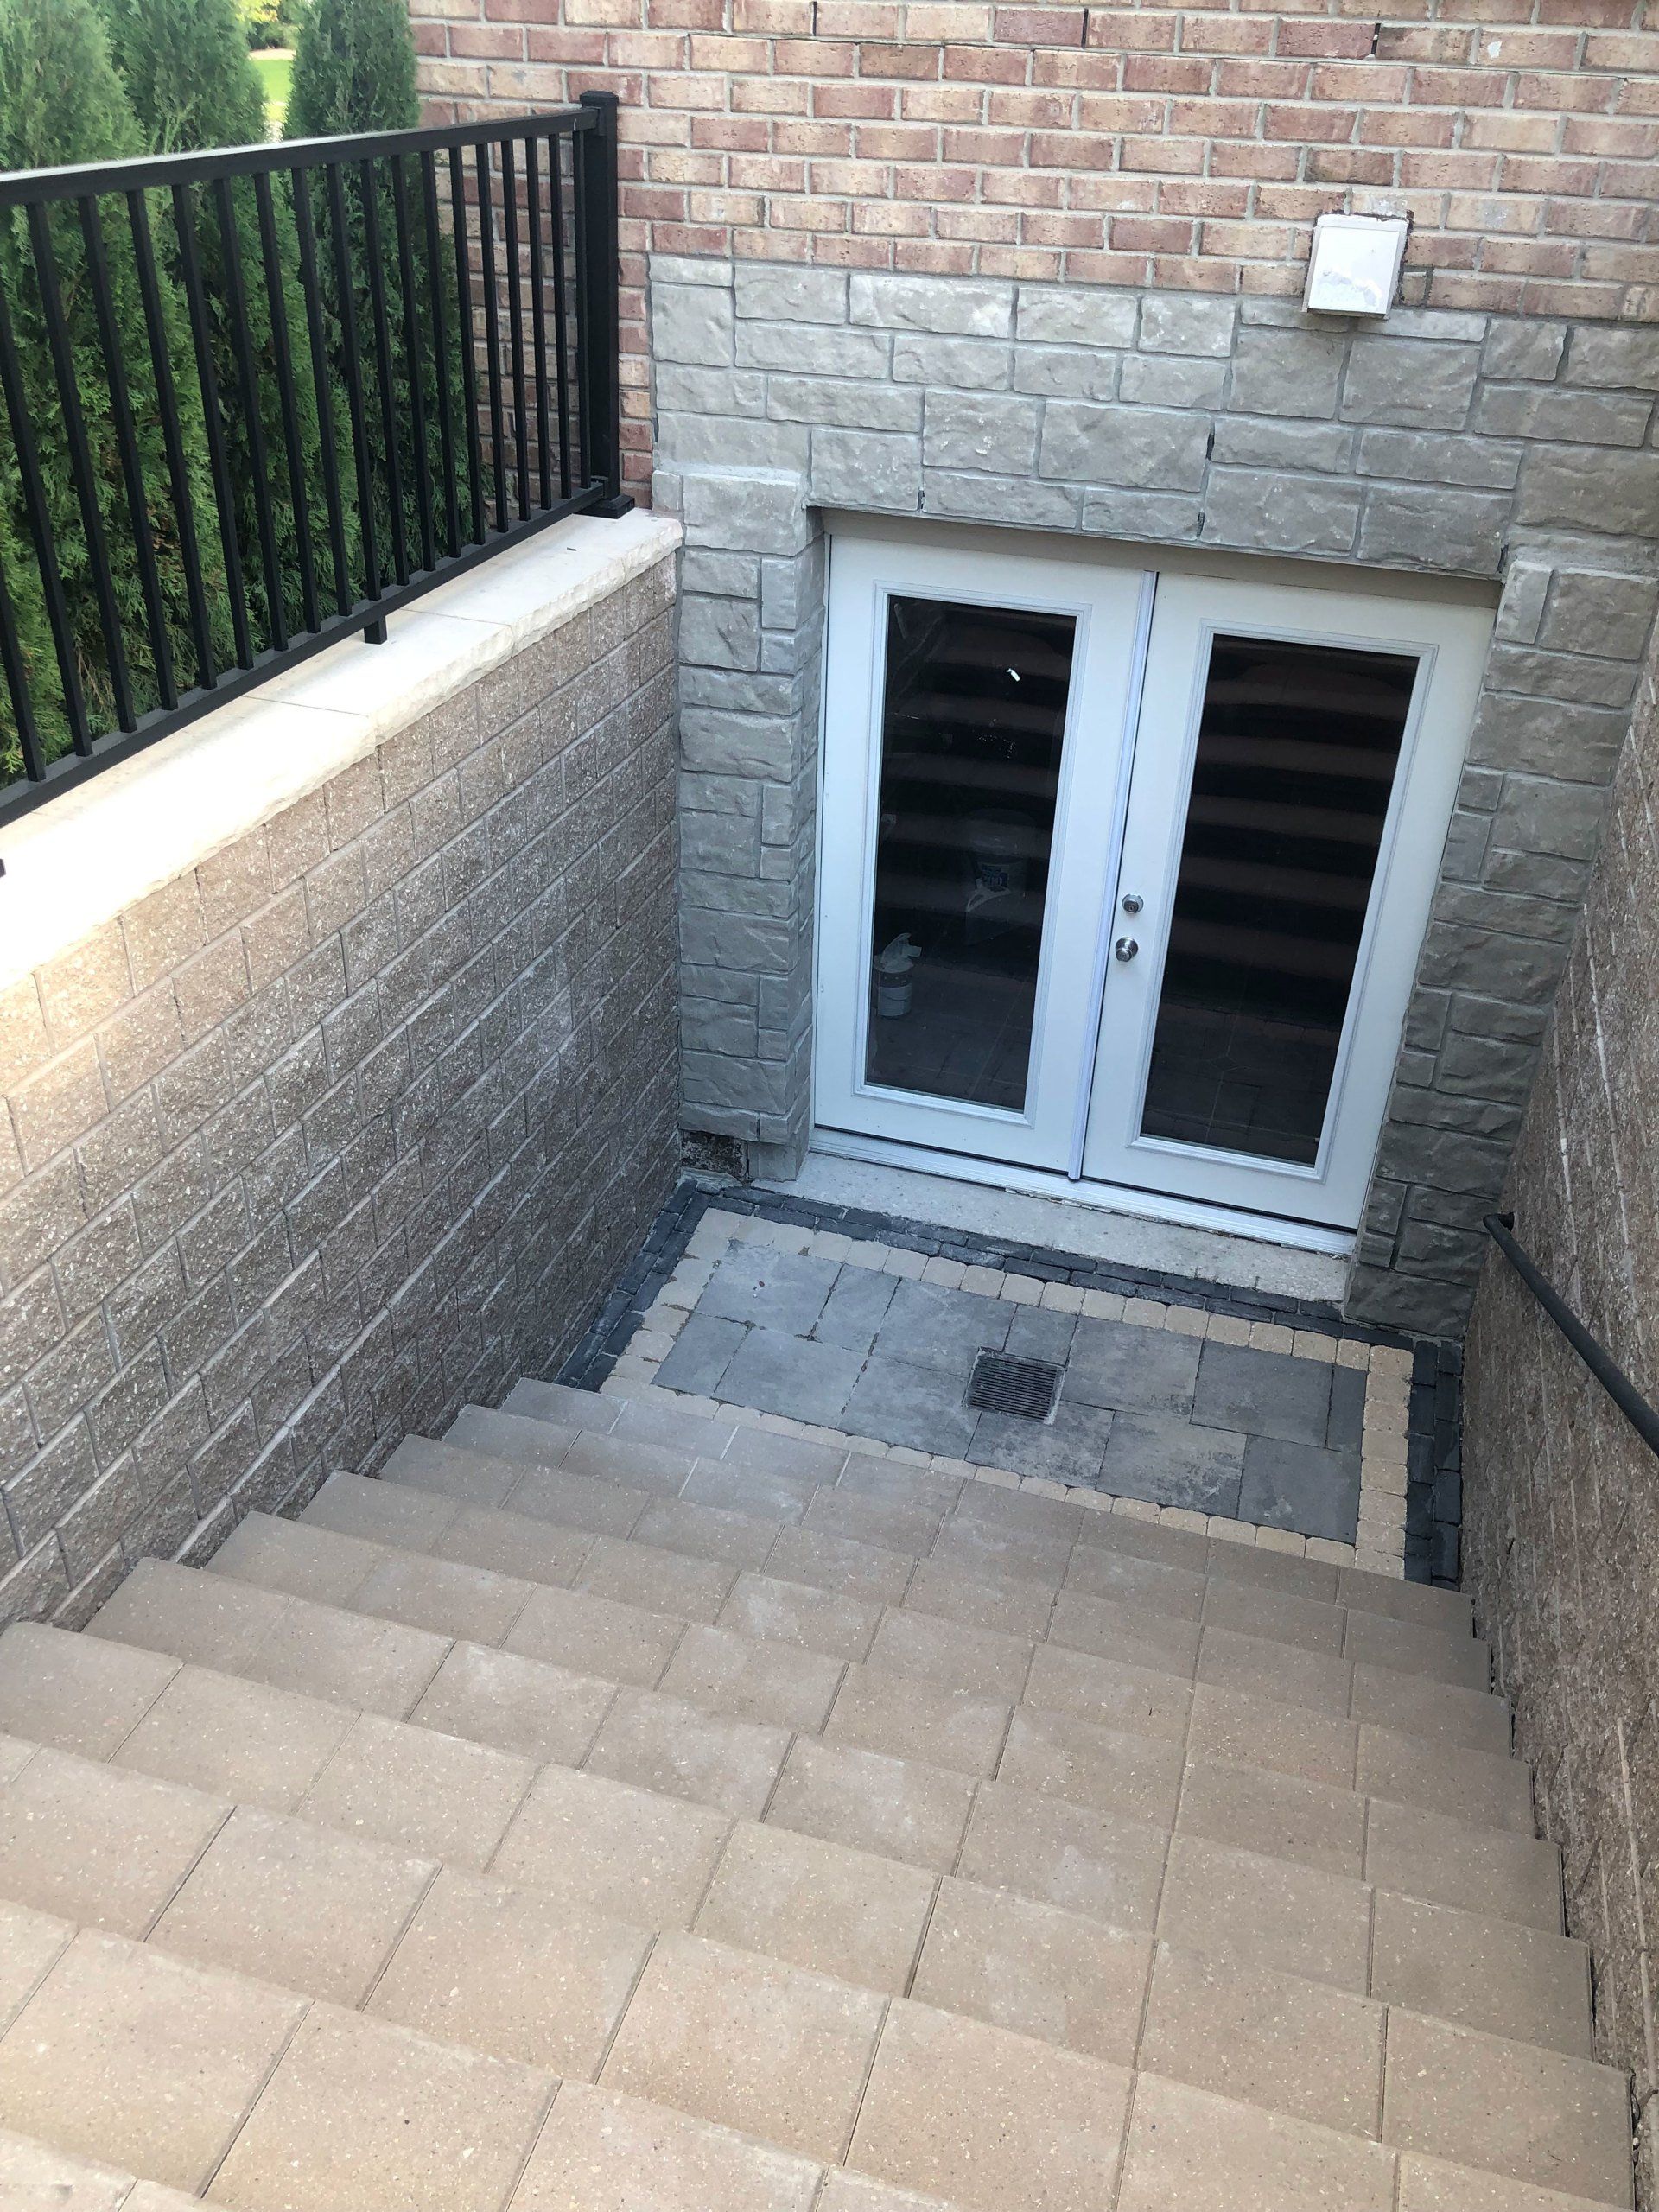 a set of stairs leading down to a basement door .